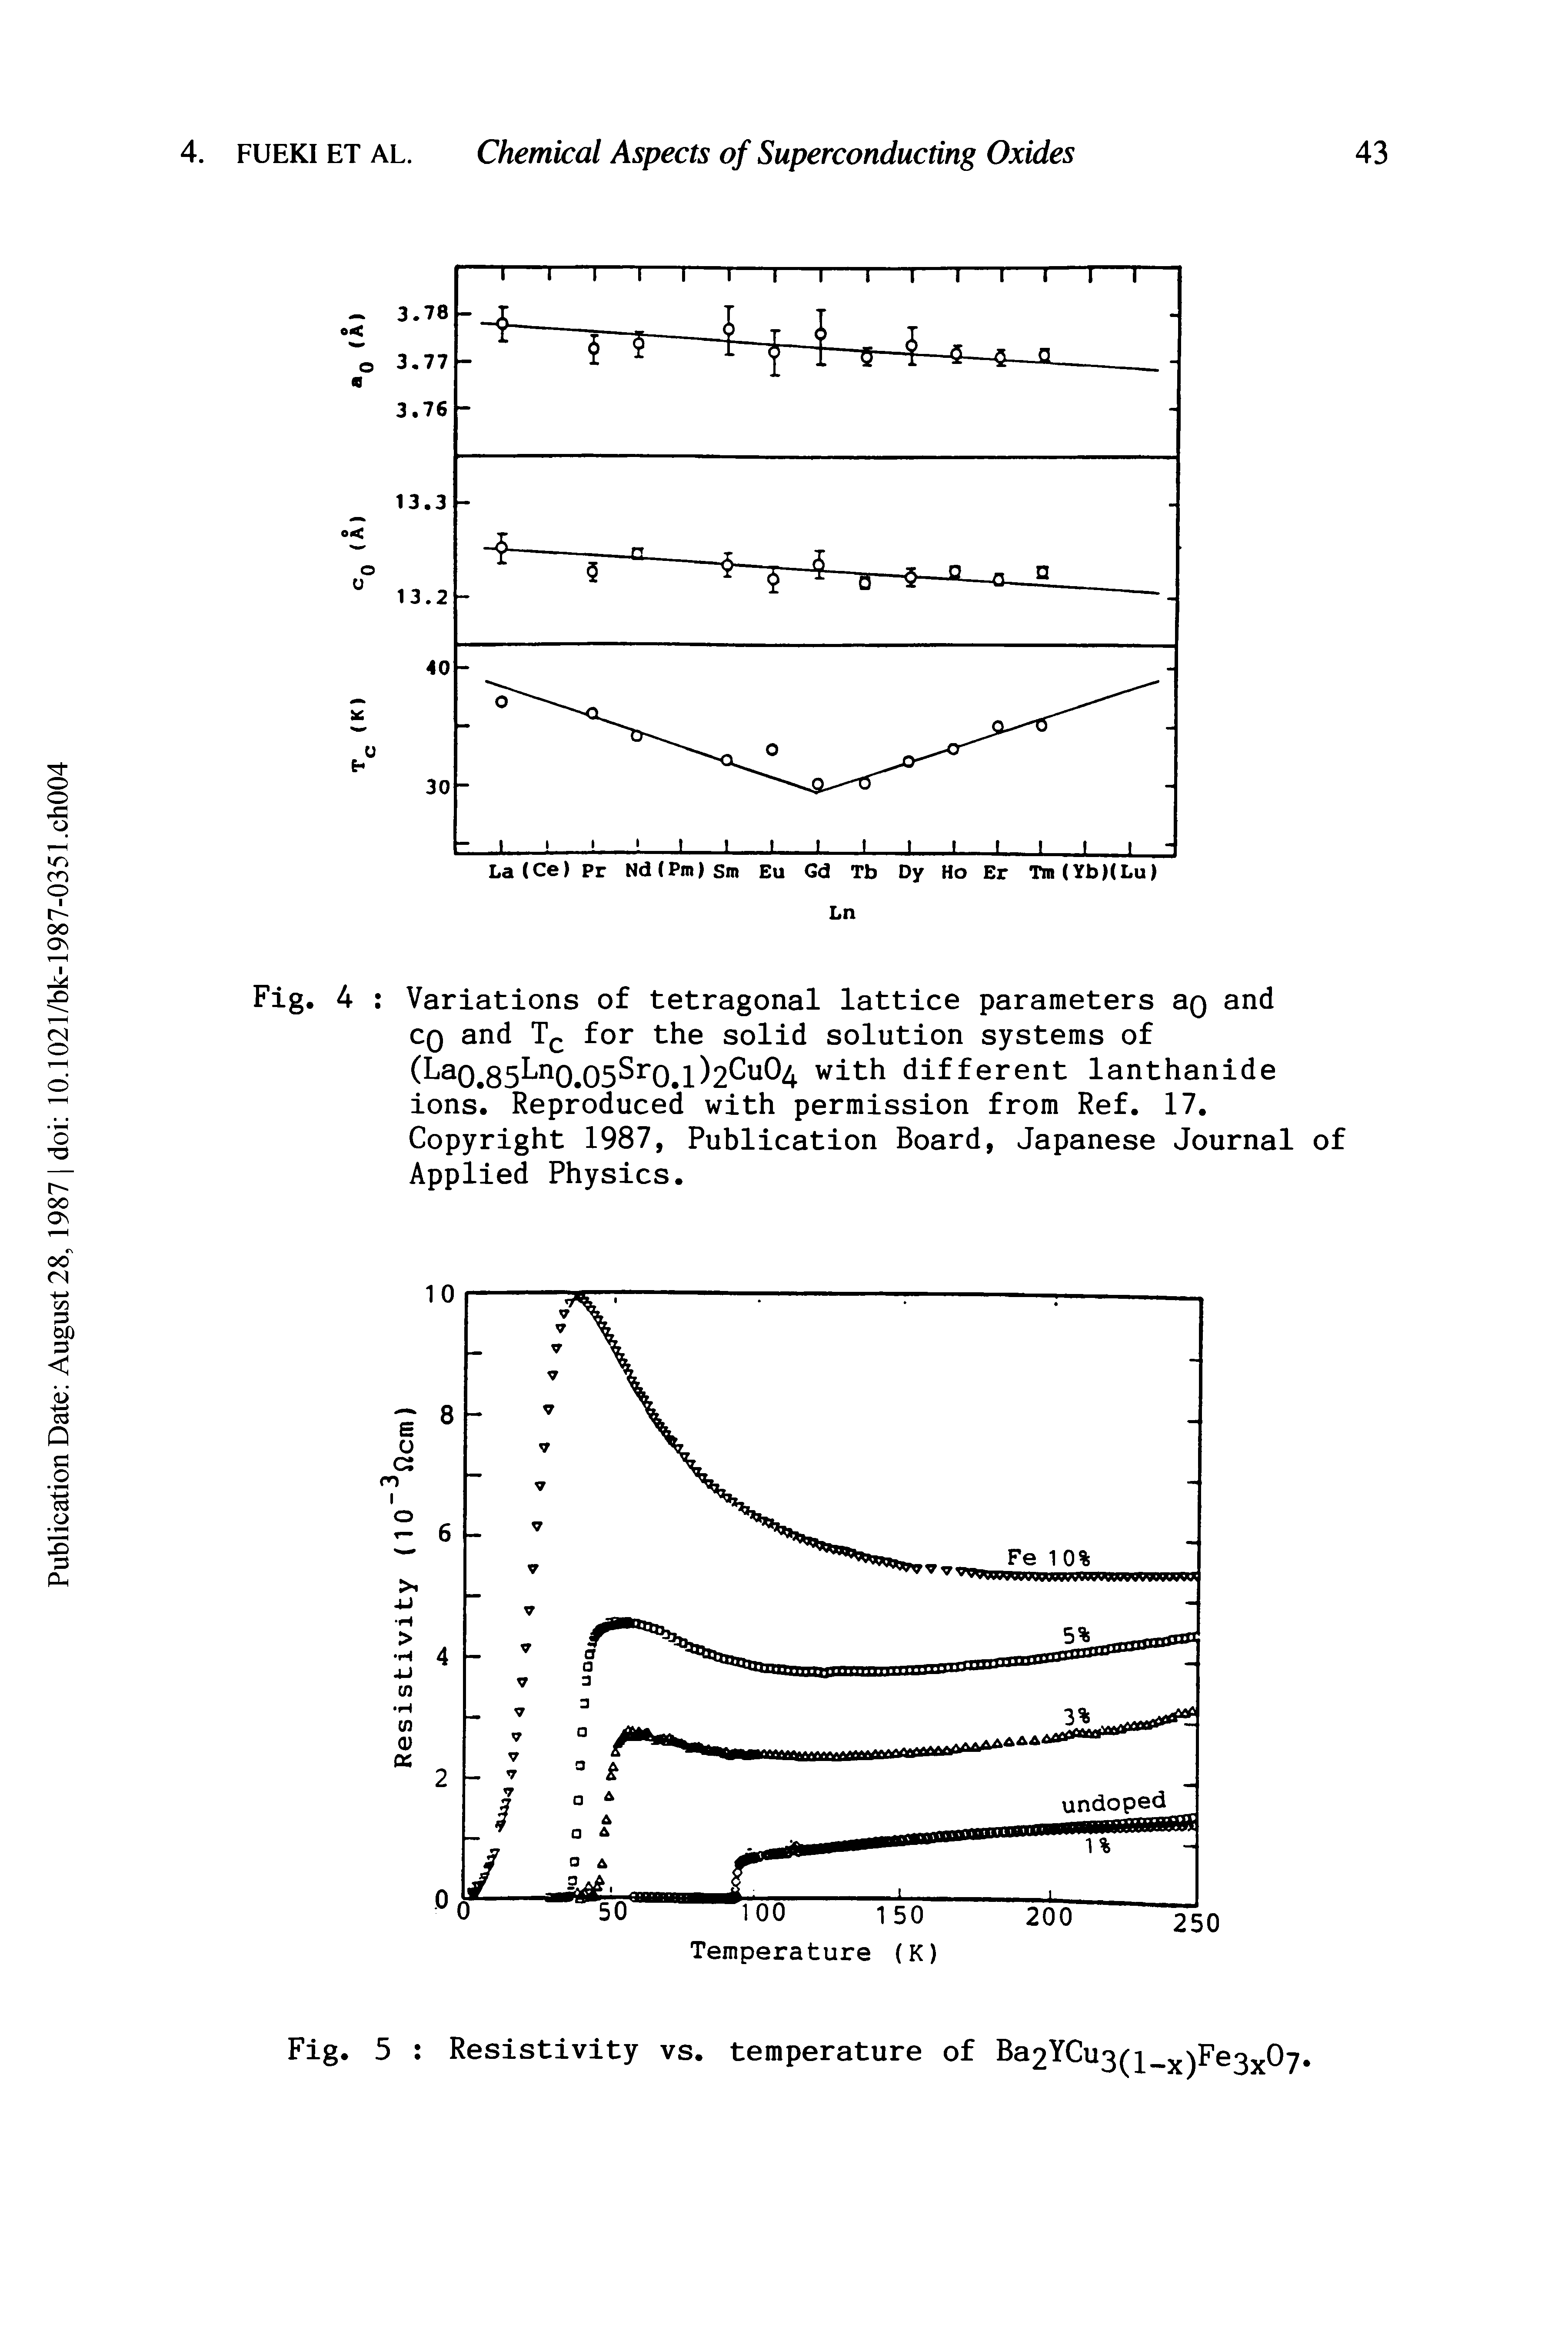 Fig. 4 Variations of tetragonal lattice parameters ag and cq and Tc for the solid solution systems of (Lao.85Lno.05 r0.l)2 u 4 with different lanthanide ions. Reproduced with permission from Ref. 17. Copyright 1987, Publication Board, Japanese Journal of Applied Physics.